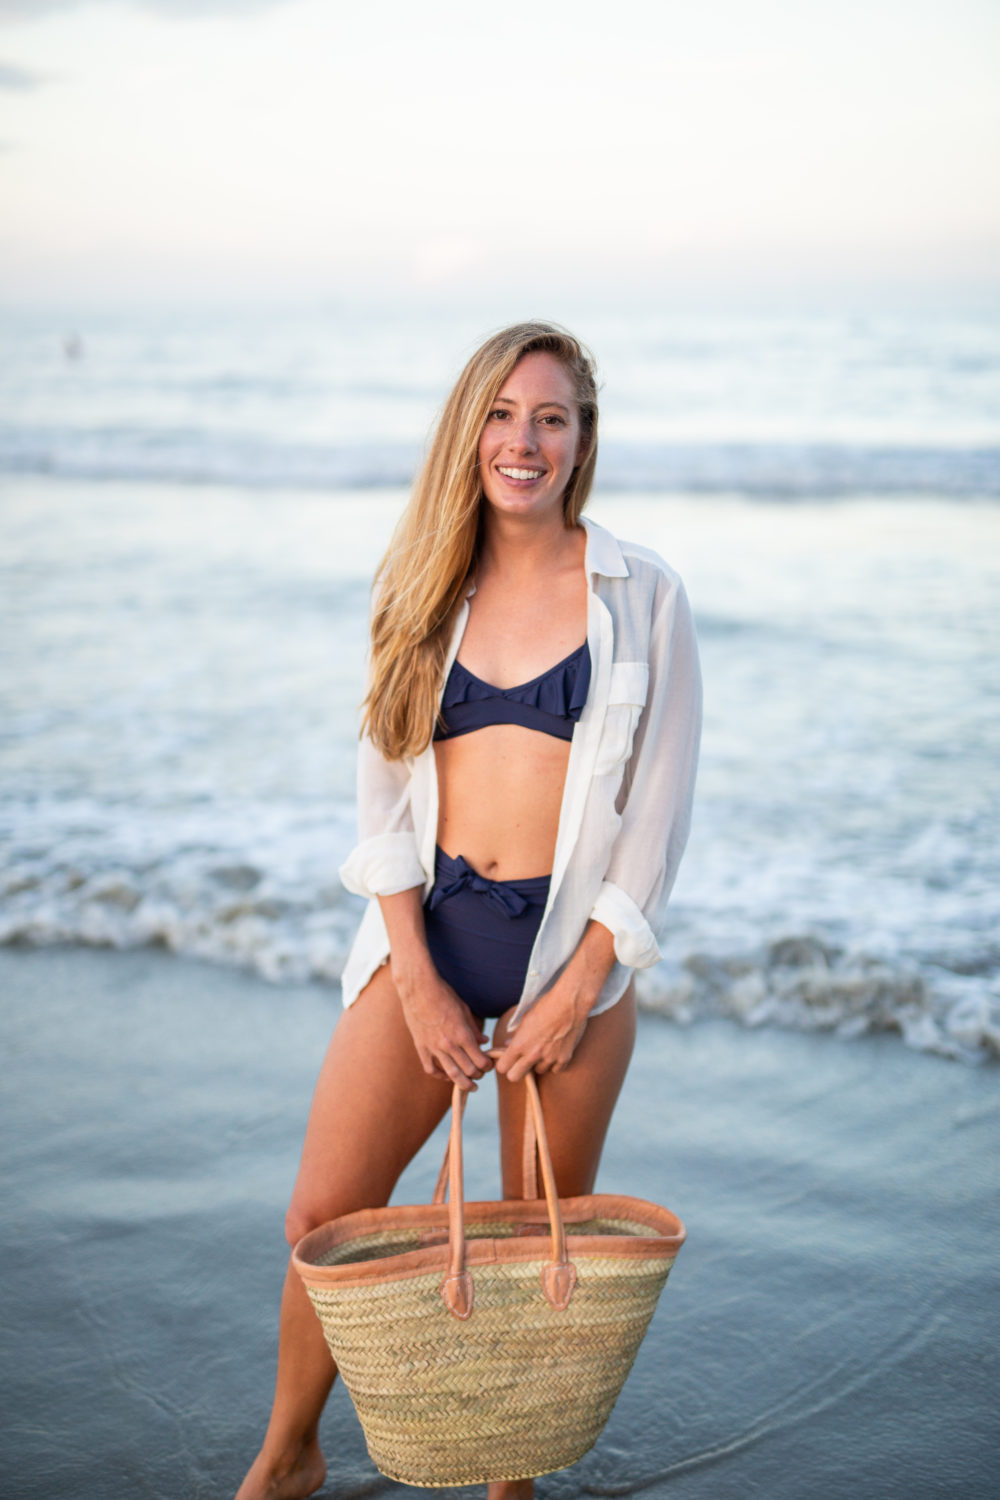 What to Pack in a Beach Bag: 20 Beach Essentials, Wearing Navy High Waisted Swimsuit, White Linen Shirt and Woven Straw Beach Bag | Sunshine Style